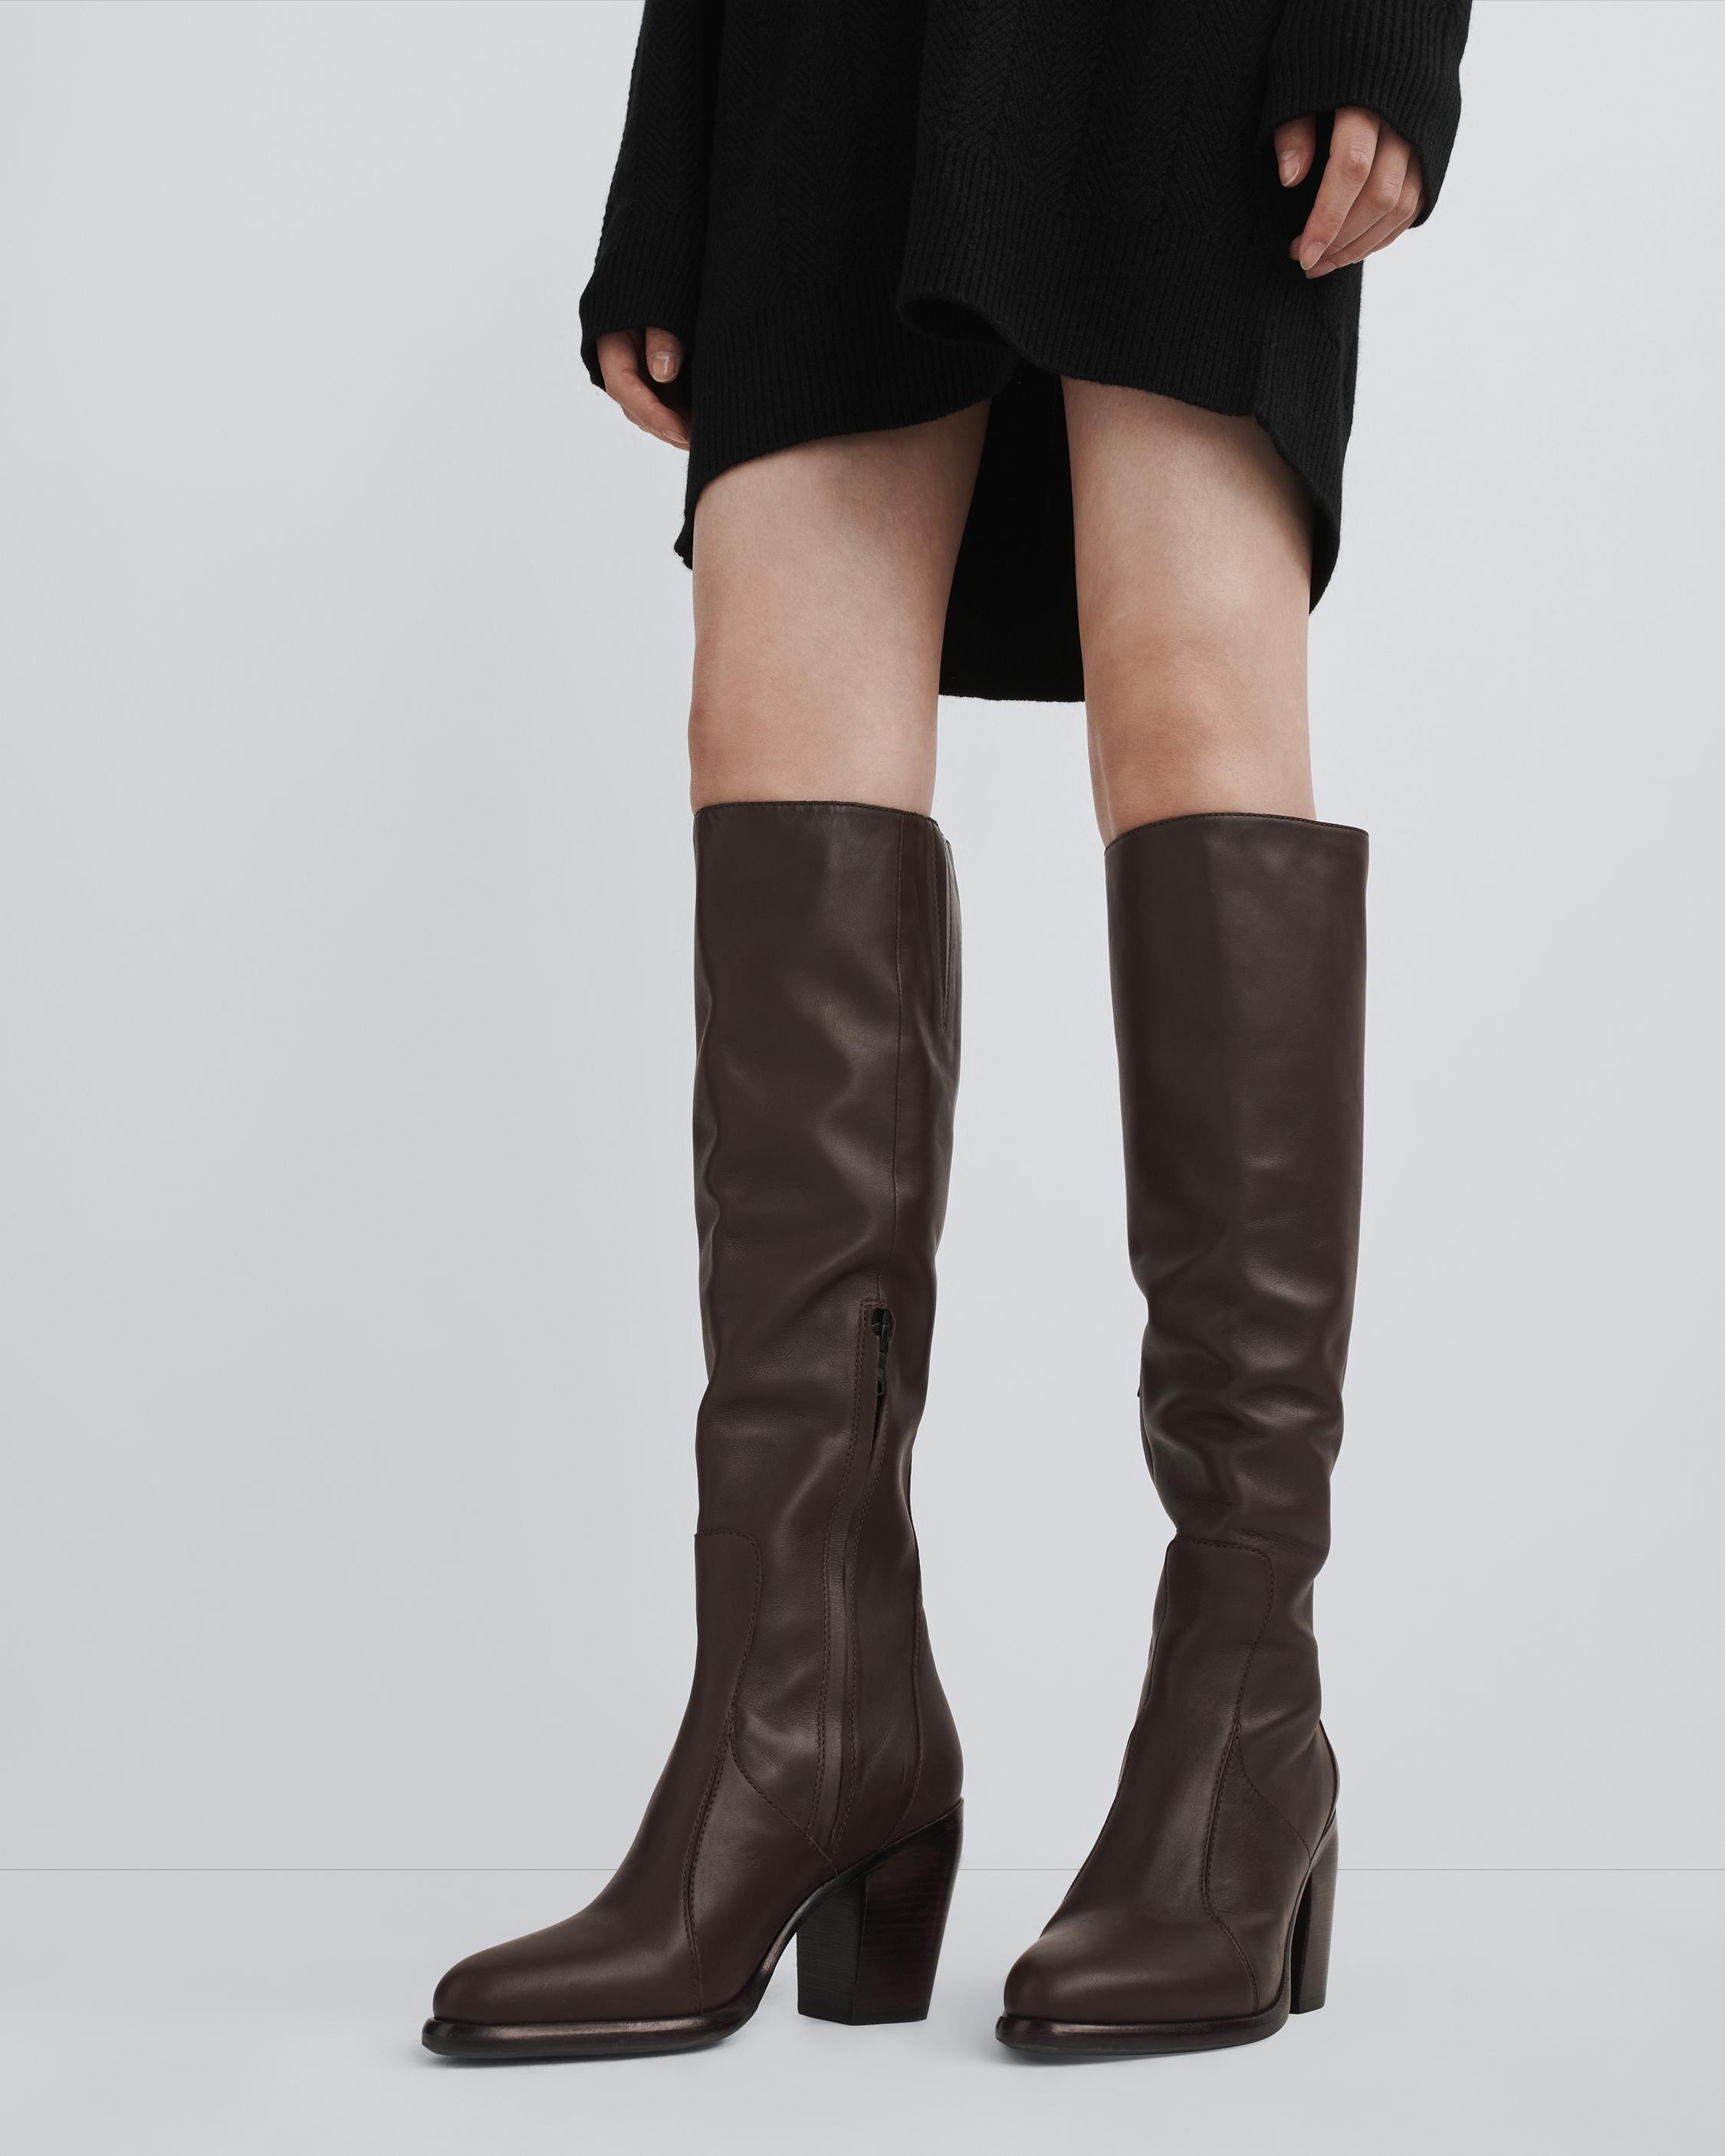 Mustang Knee-High Boot - Leather
Heeled Boot - 2